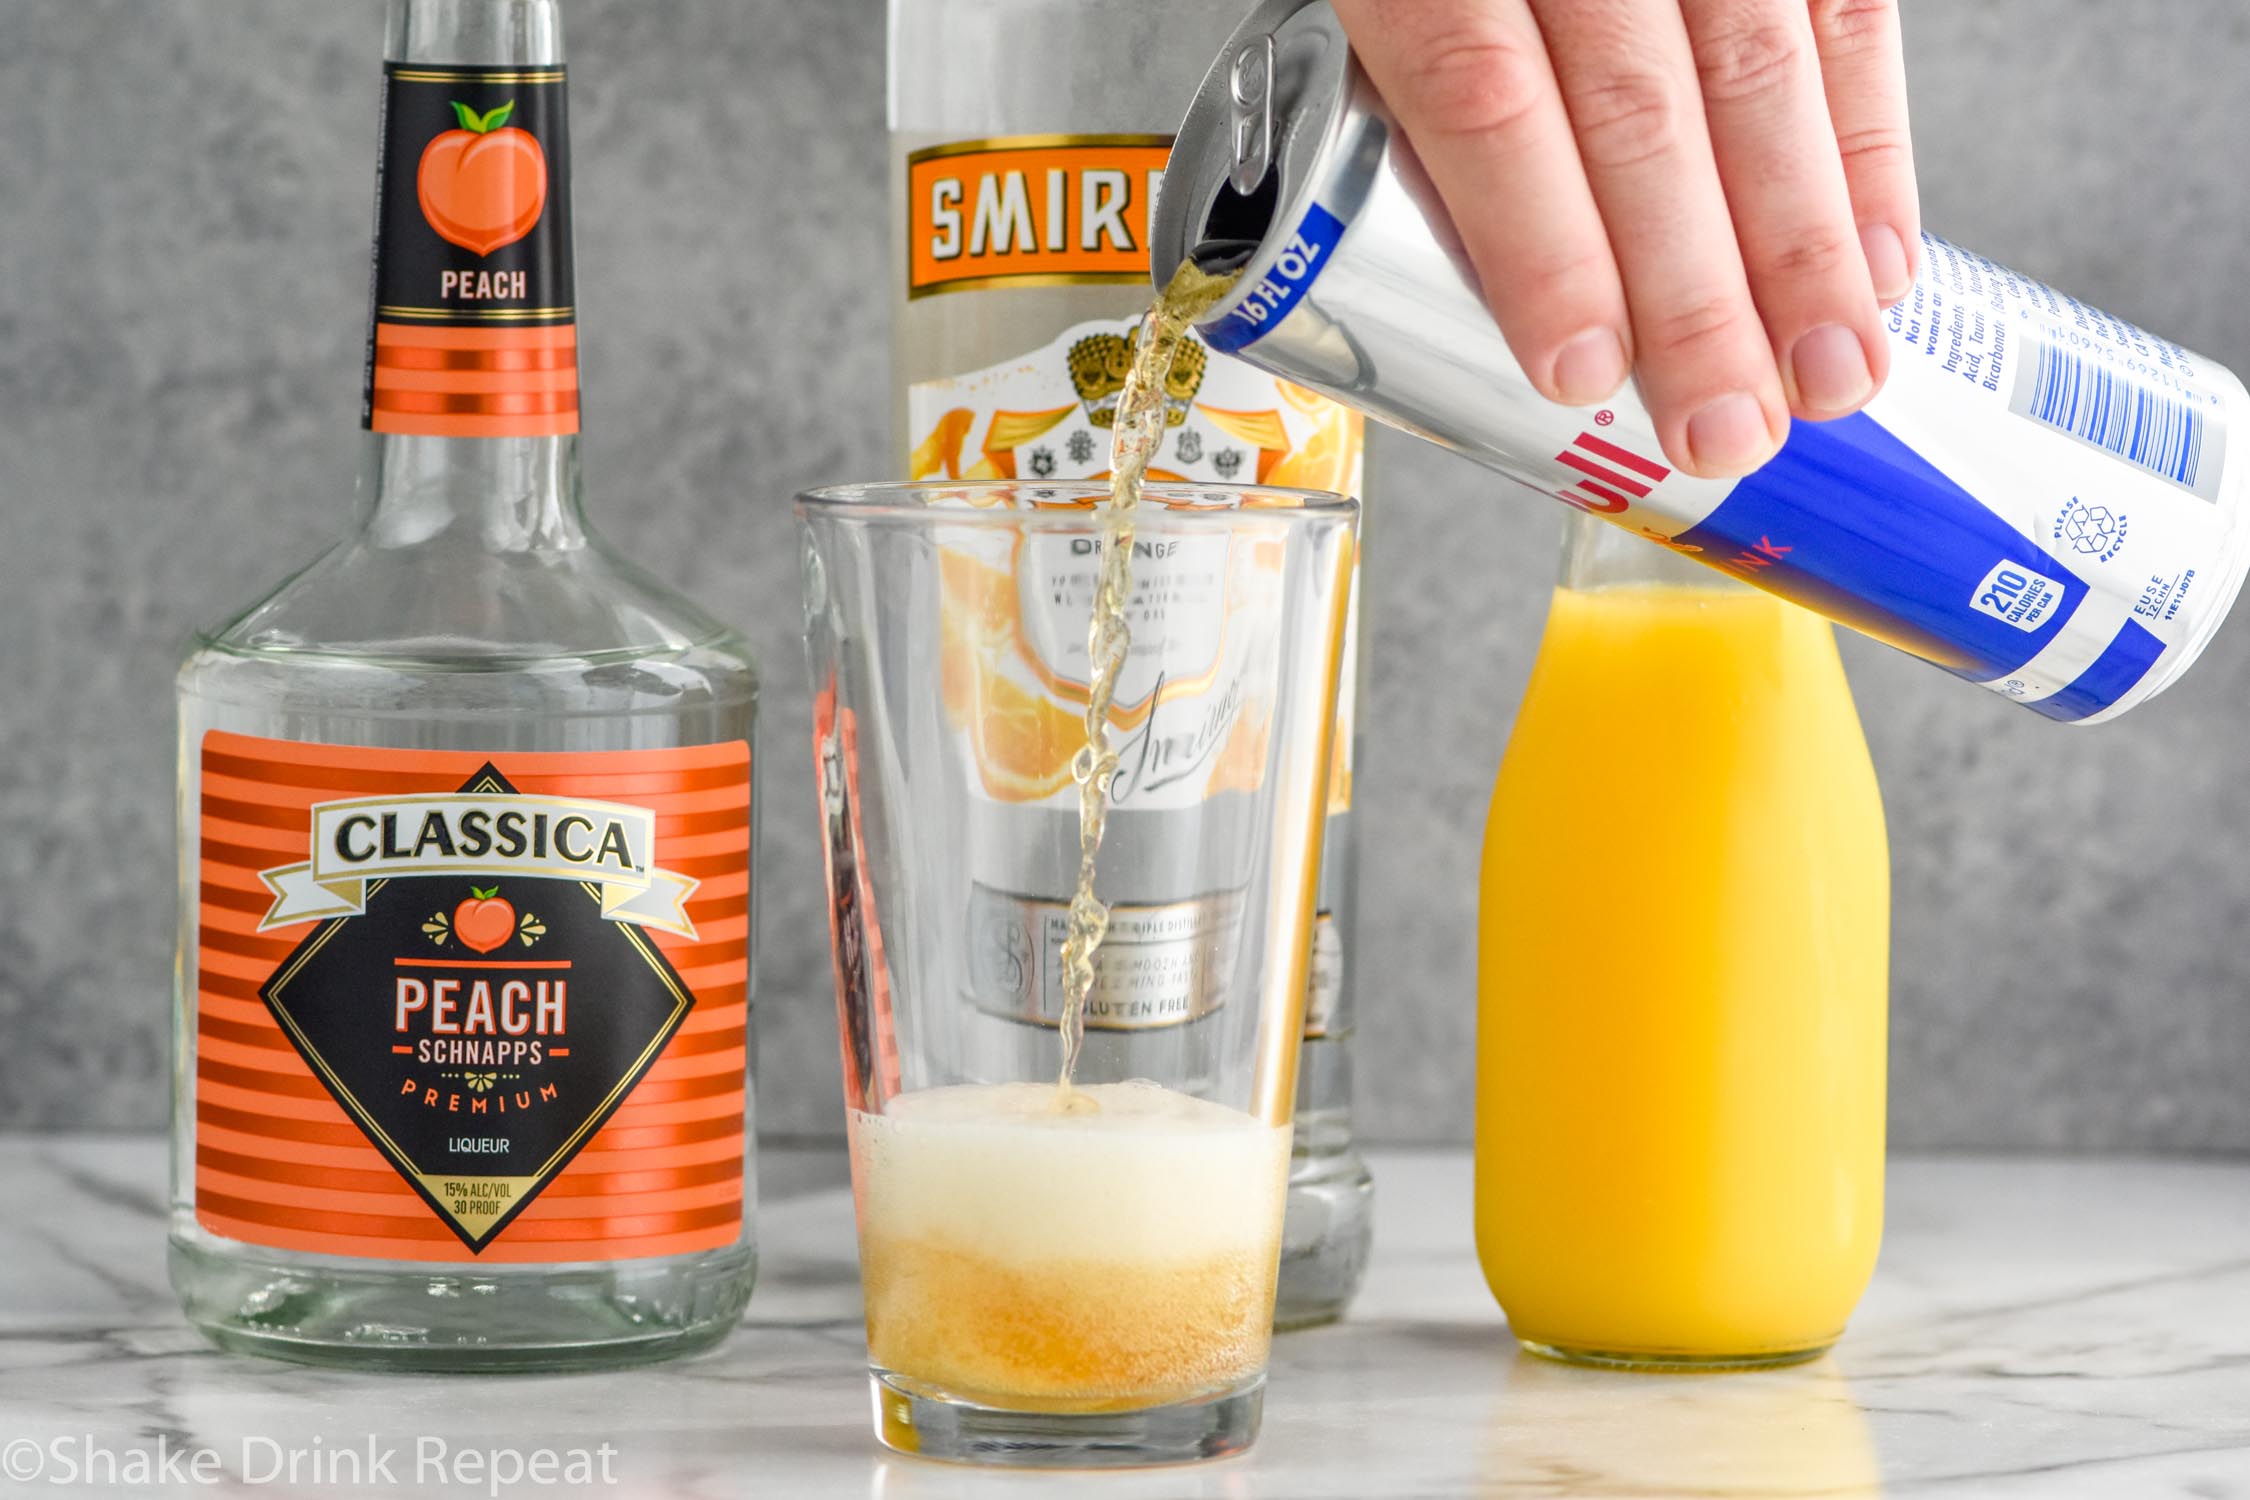 Side view of person's hand pouring can of Red Bull into a pint glass for Cactus Cooler Shot recipe. Bottles of peach schnapps, mandarin vodka, and orange juice behind glass.